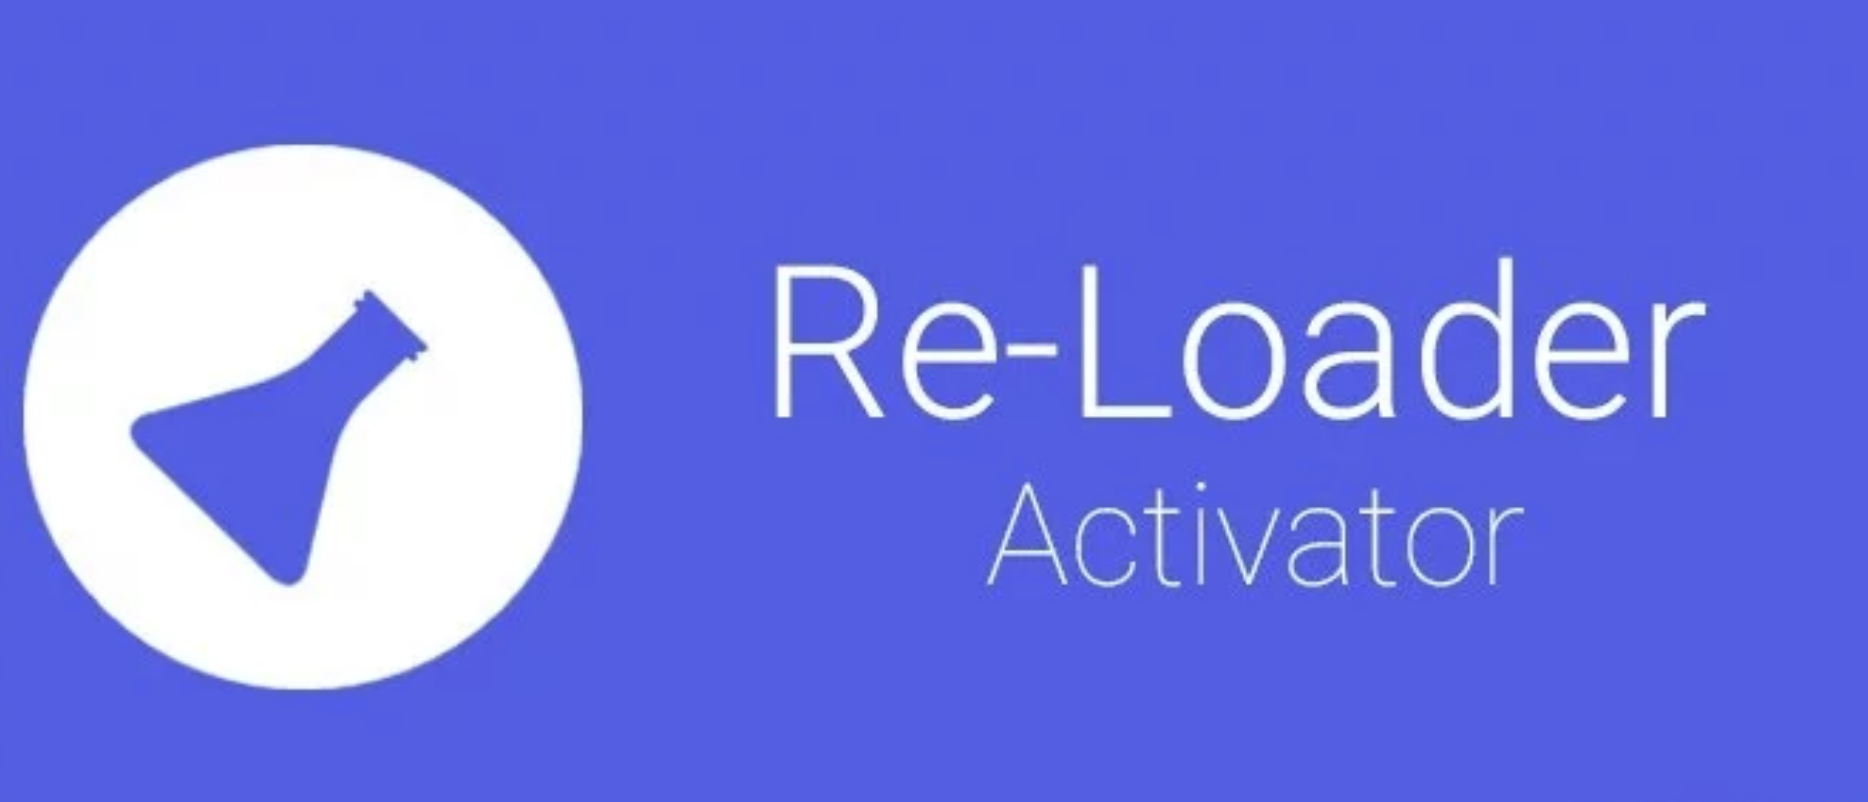 How To Use Re-Loader Activator On Windows